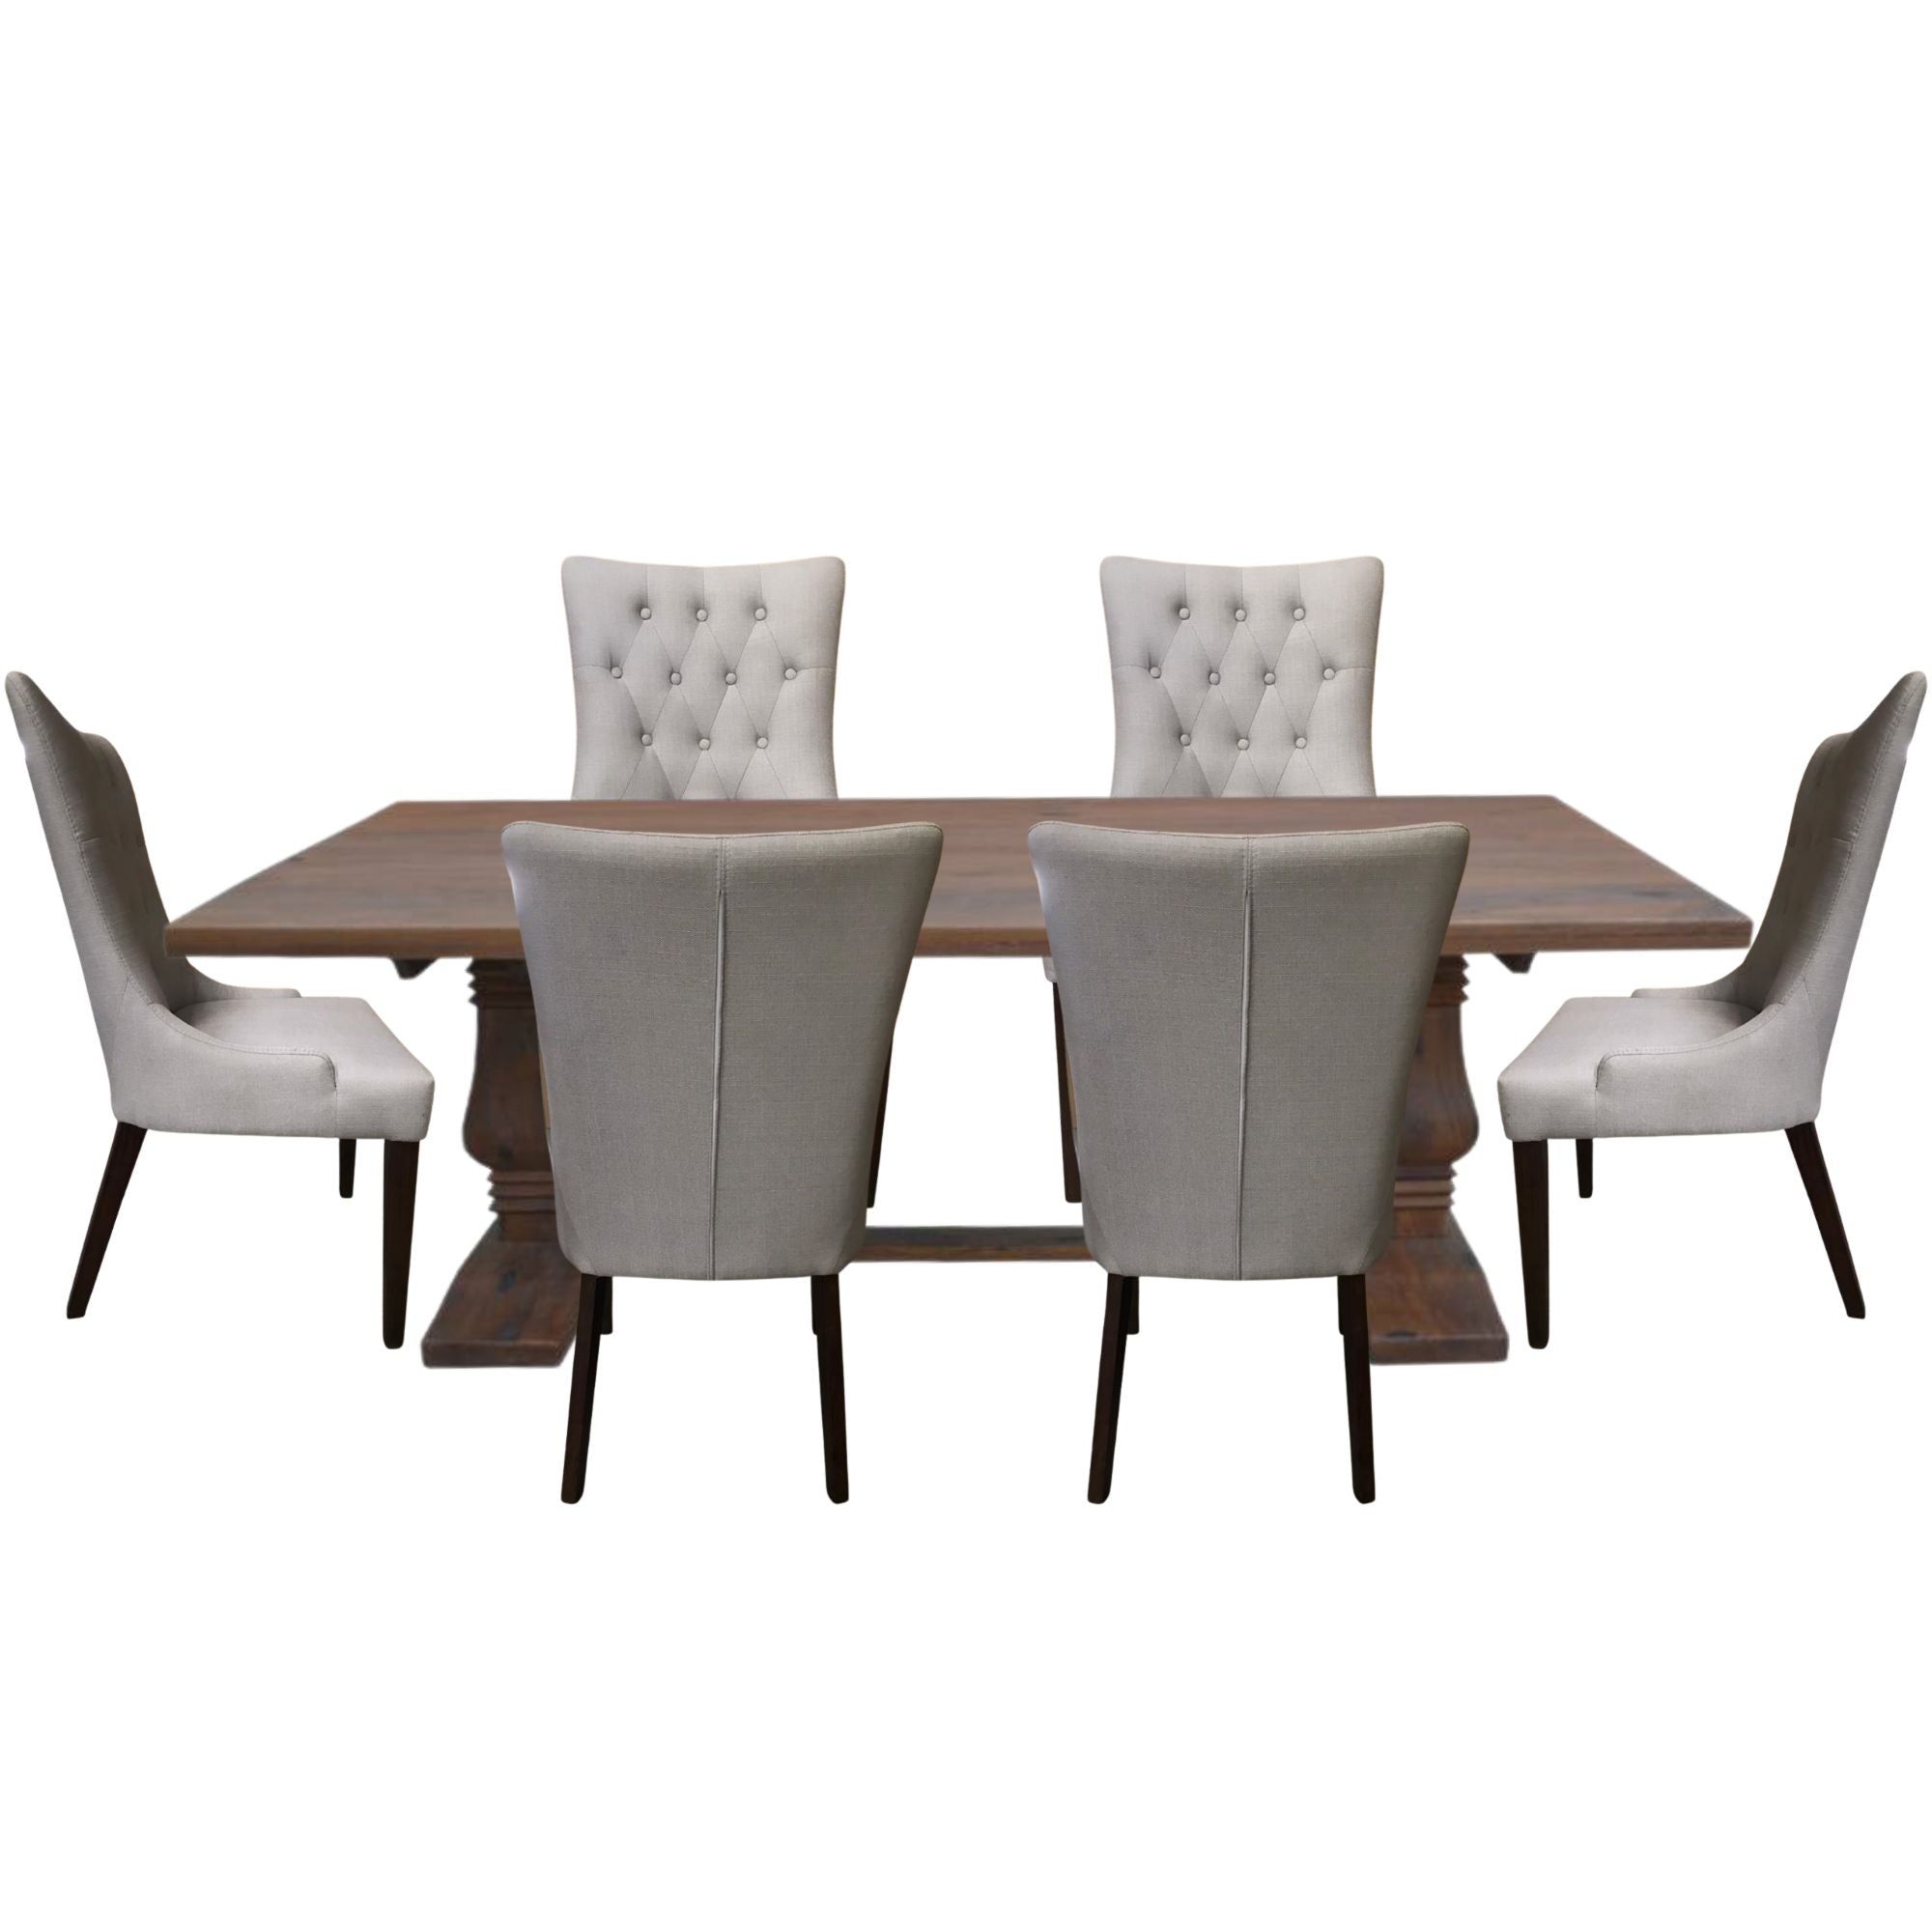 7pc Dining Table Set 180cm with 6 Fabric Chair French Provincial